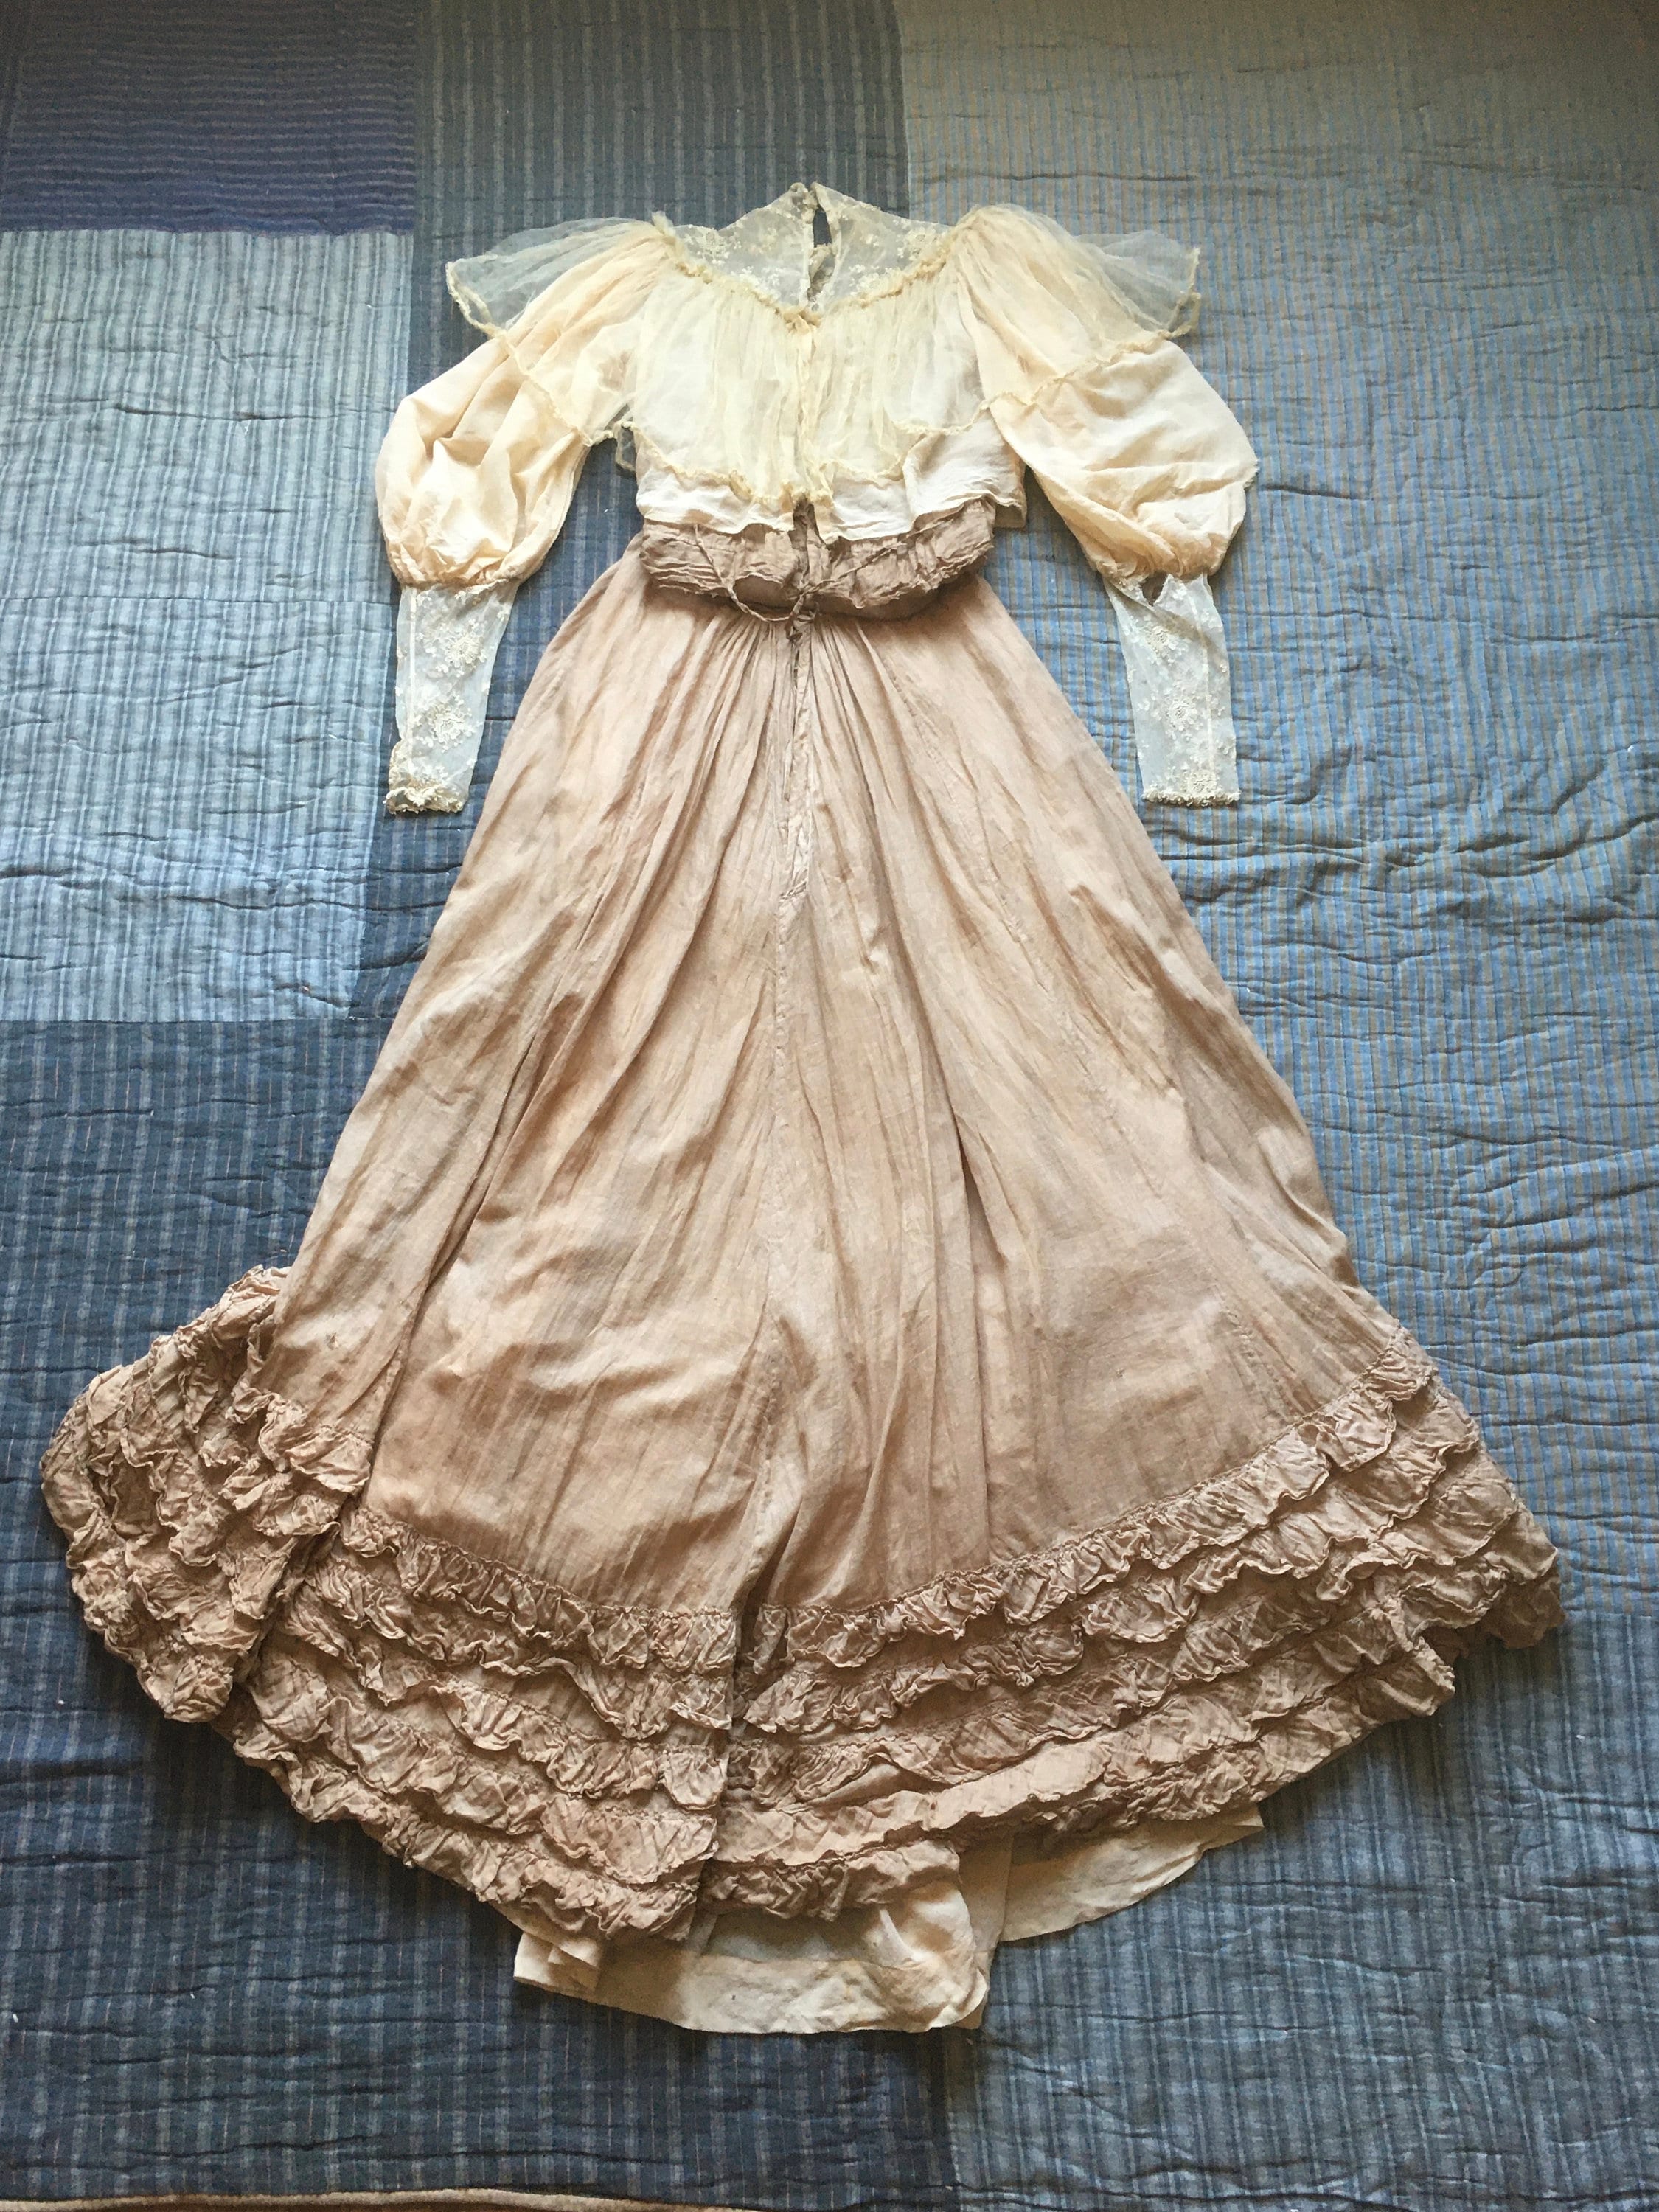 Edwardian Tea Gown, 1900 - For The Love Of Old Houses | Facebook